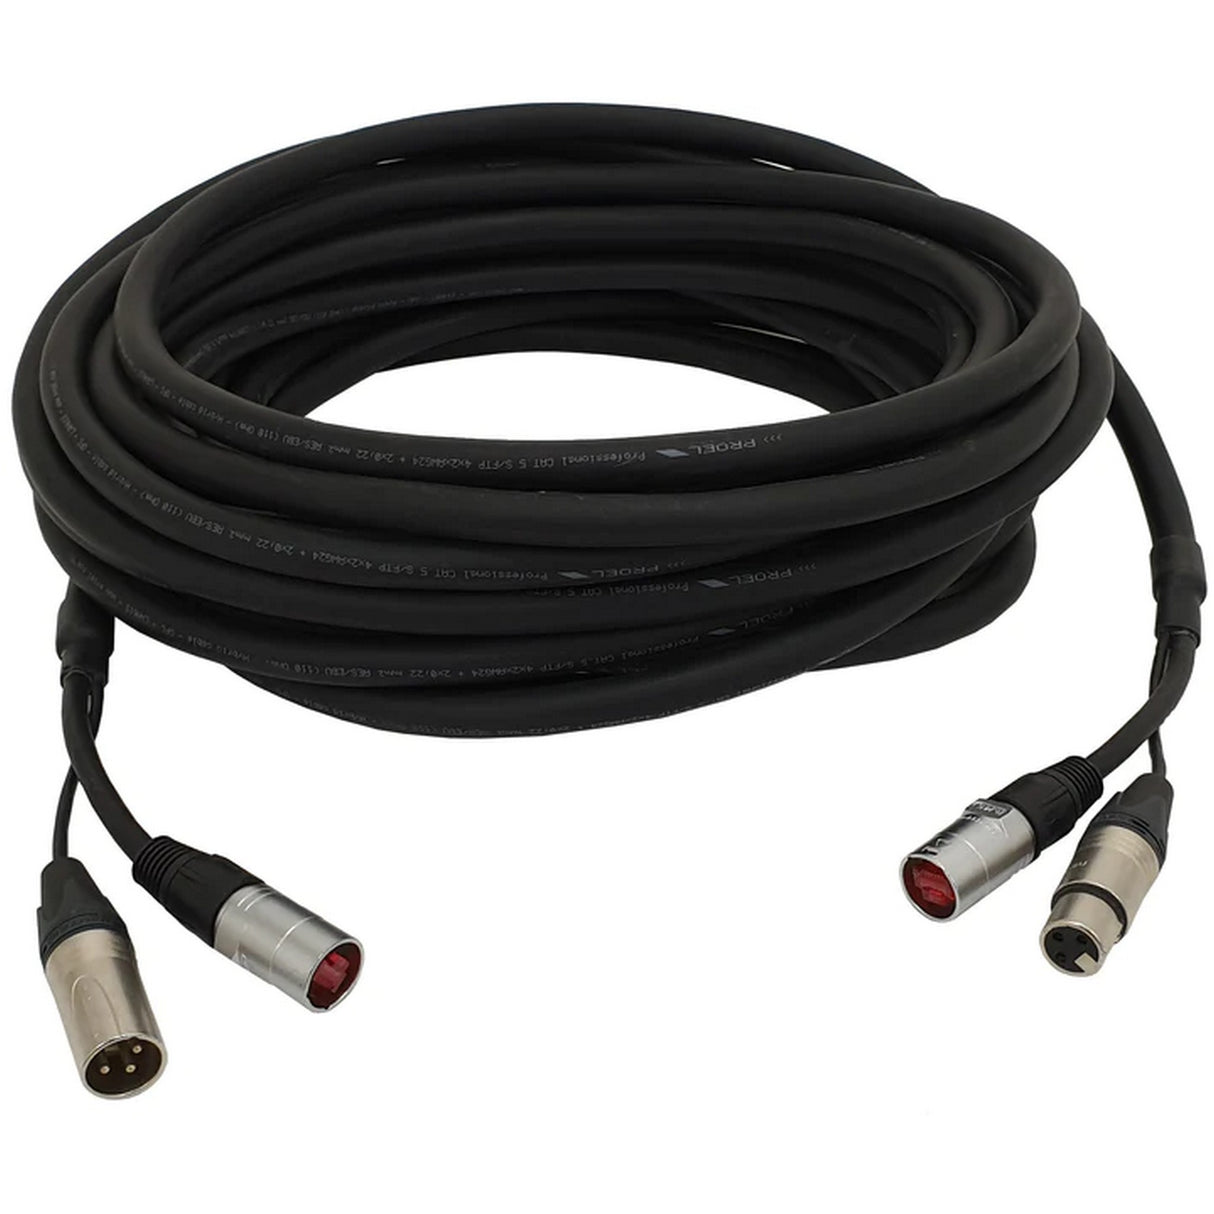 Axiom AR100LU15 Audio and Remote Cable for Linking Flying Speakers to Floor Subwoofers, 49-Feet